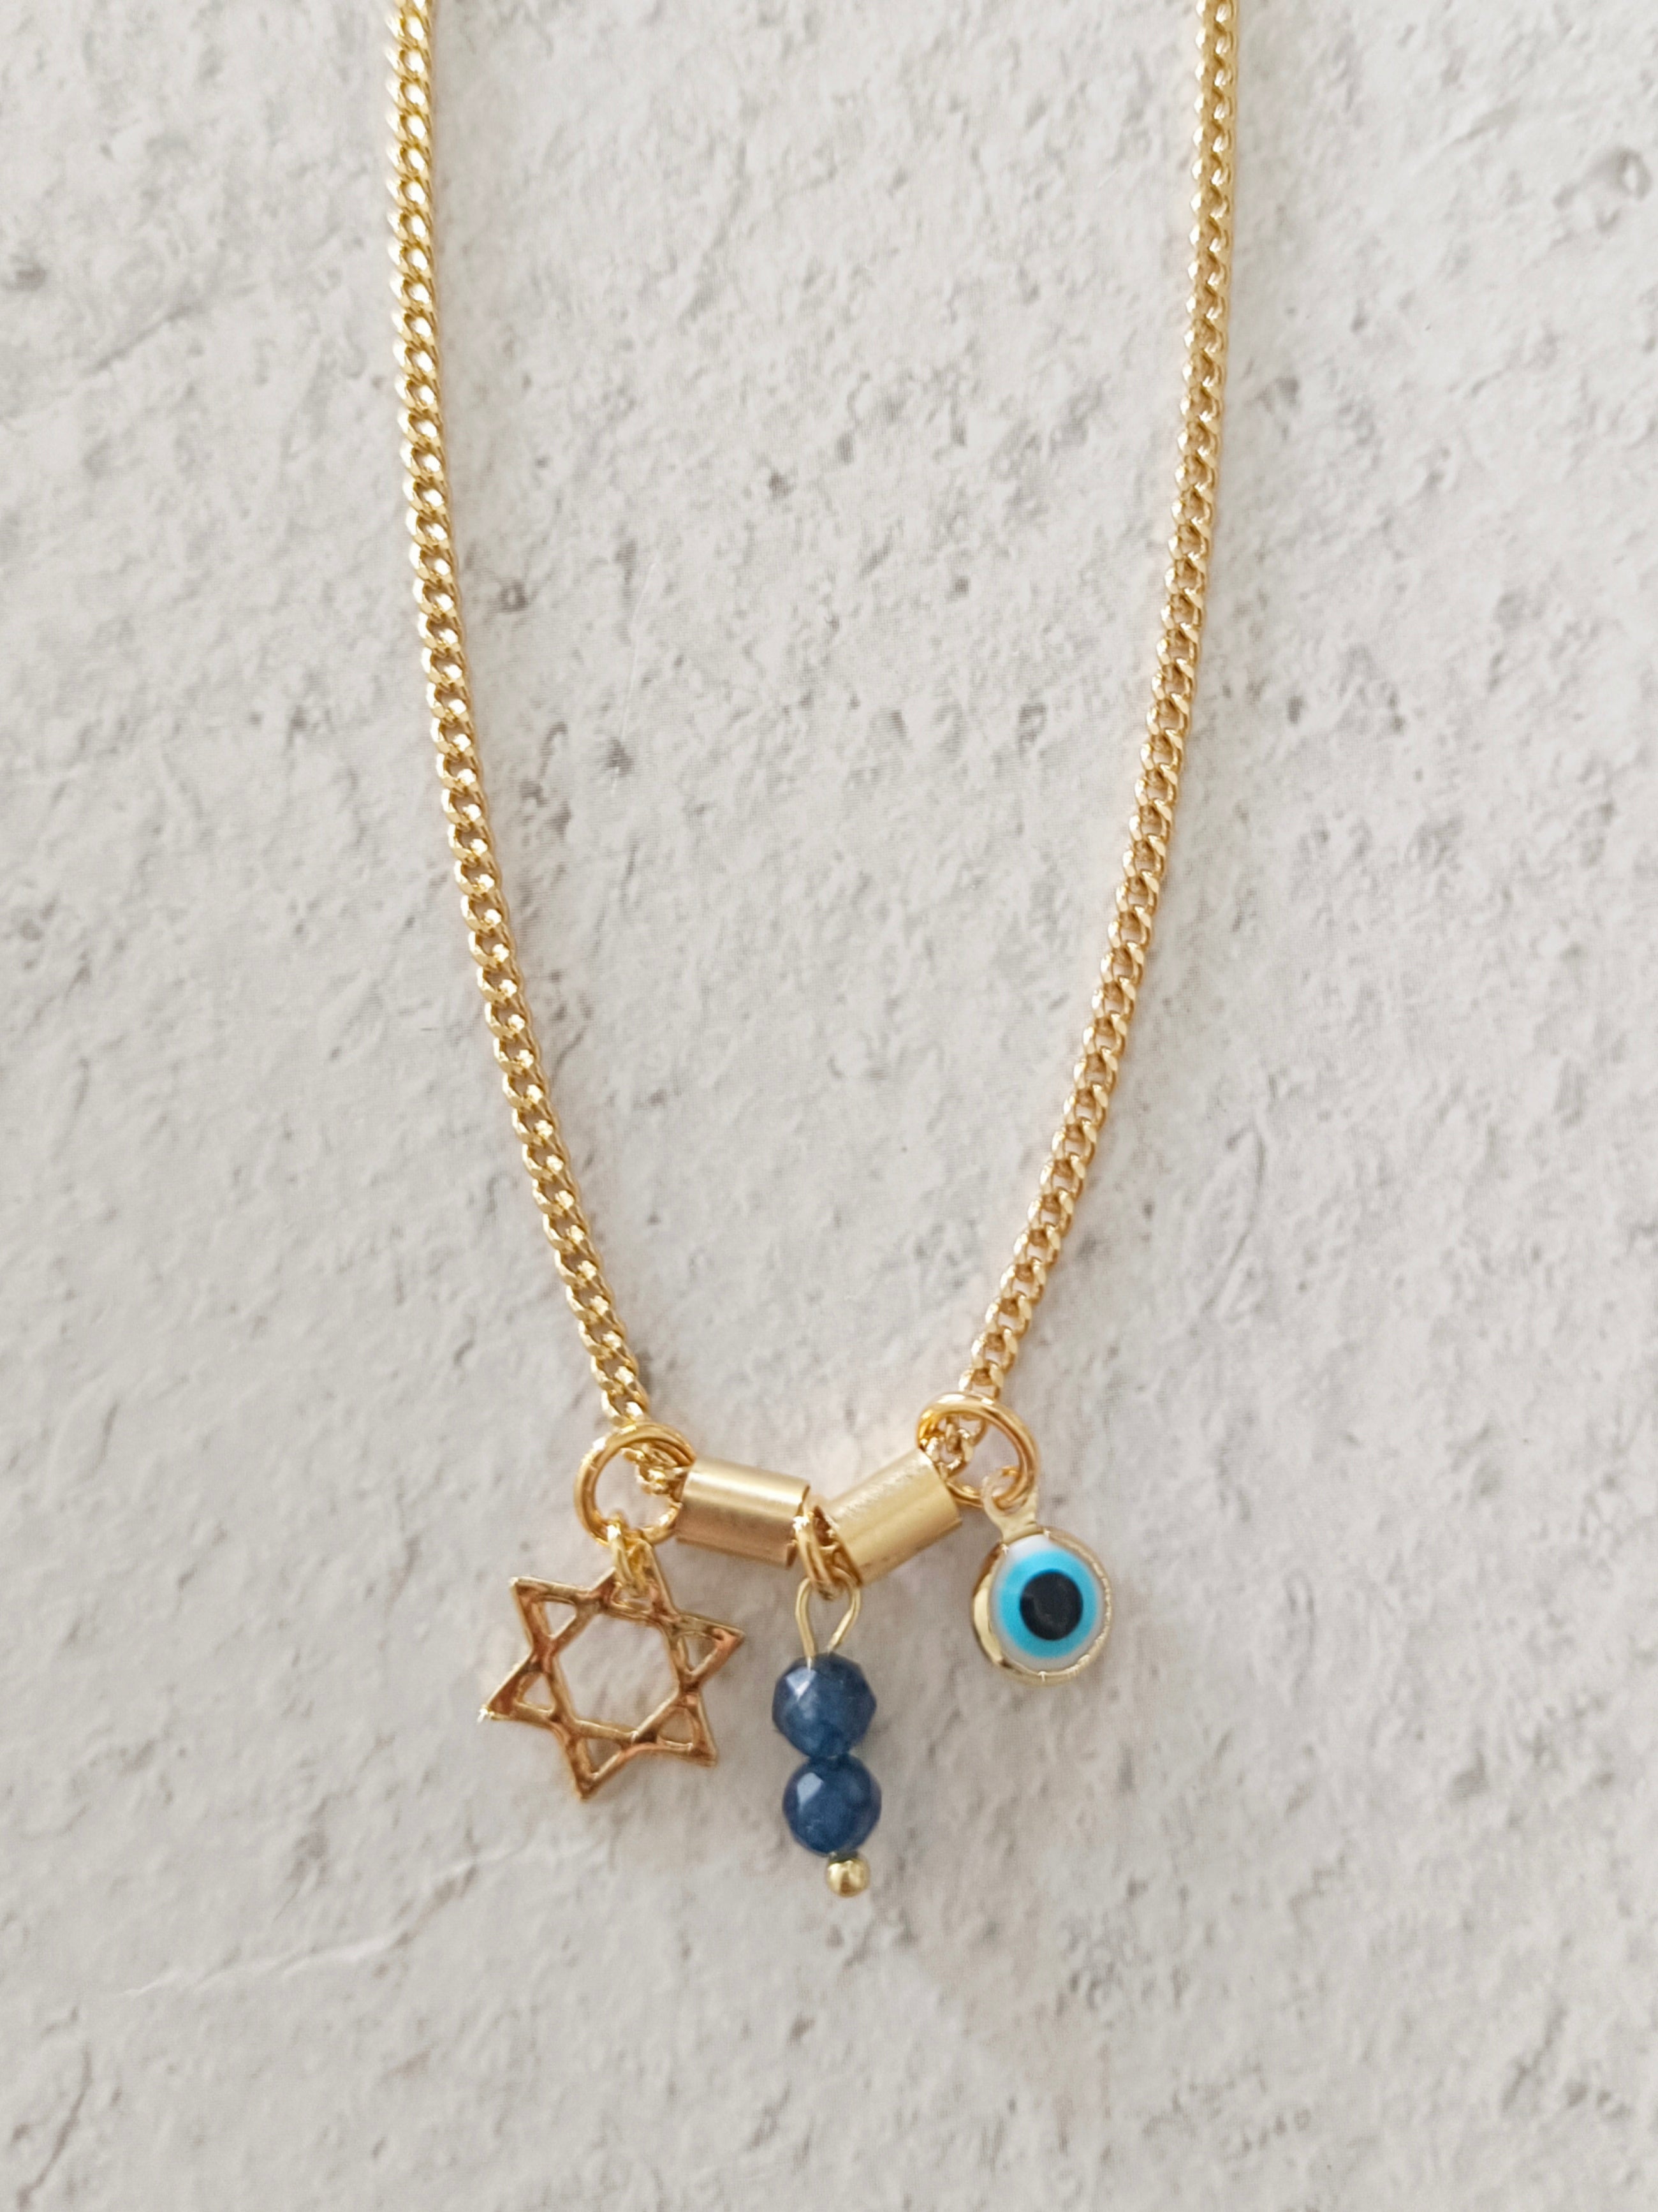 Wake up A gold-plated necklace and various pendants in blue shades